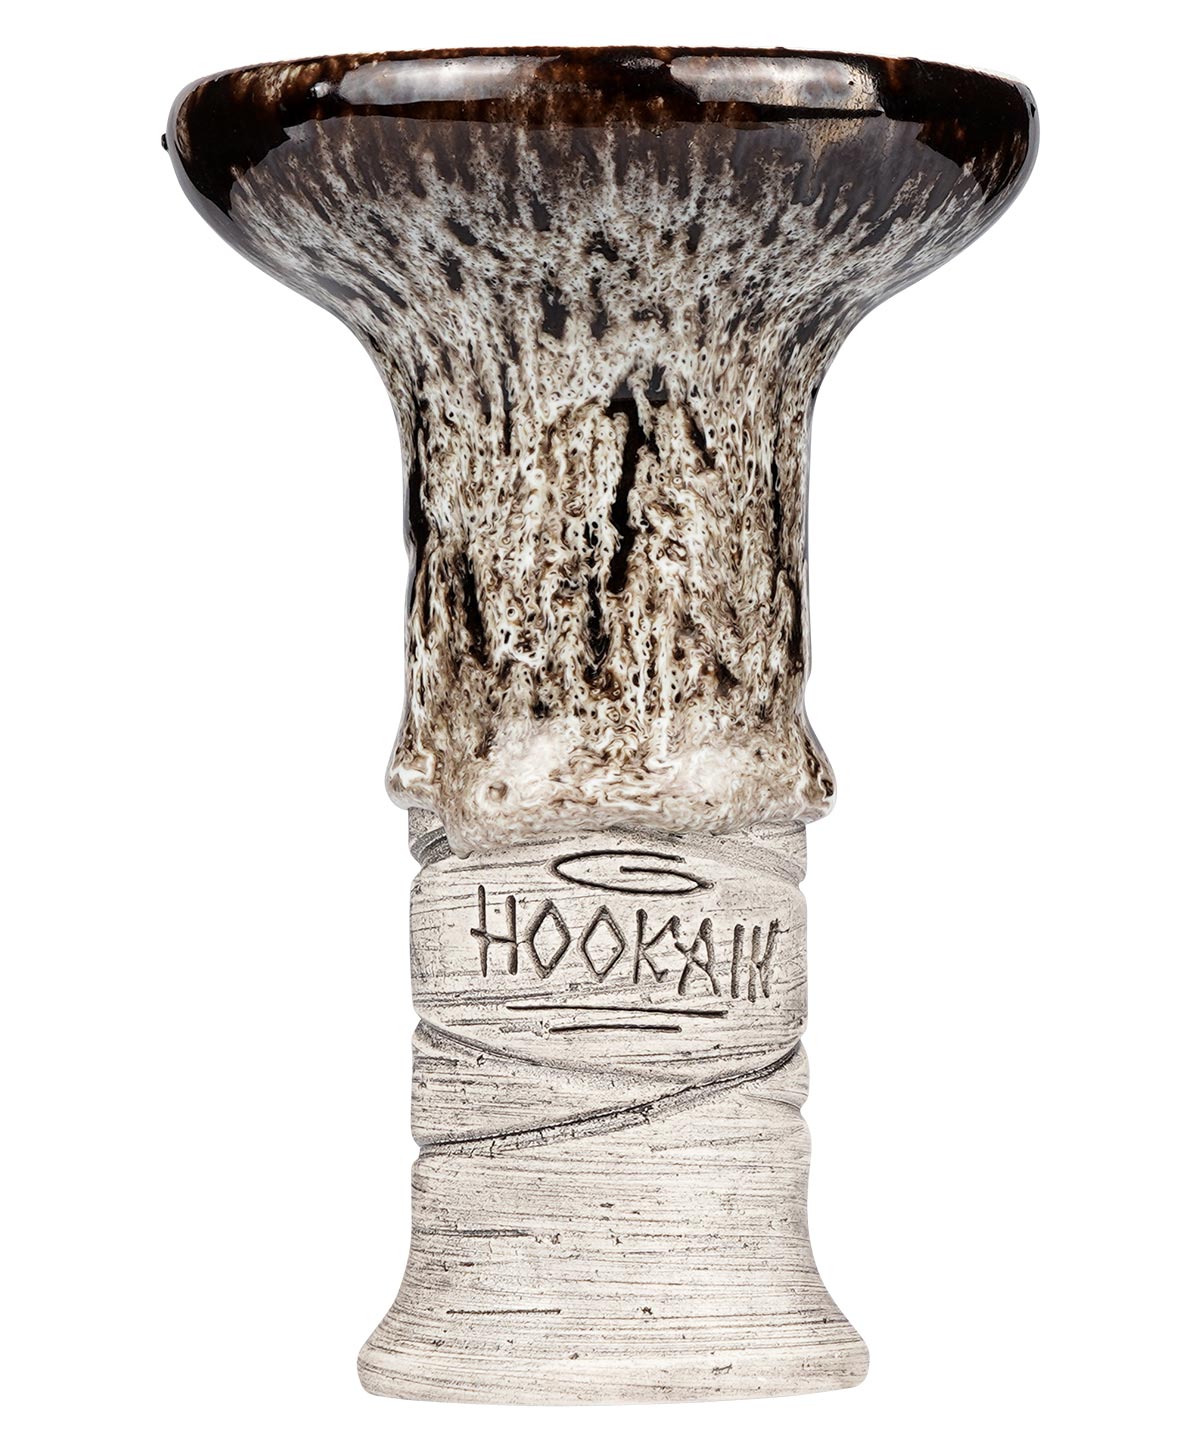 Hookain Lit Lip - BRO-NZE  Excellent all-round Phunnel